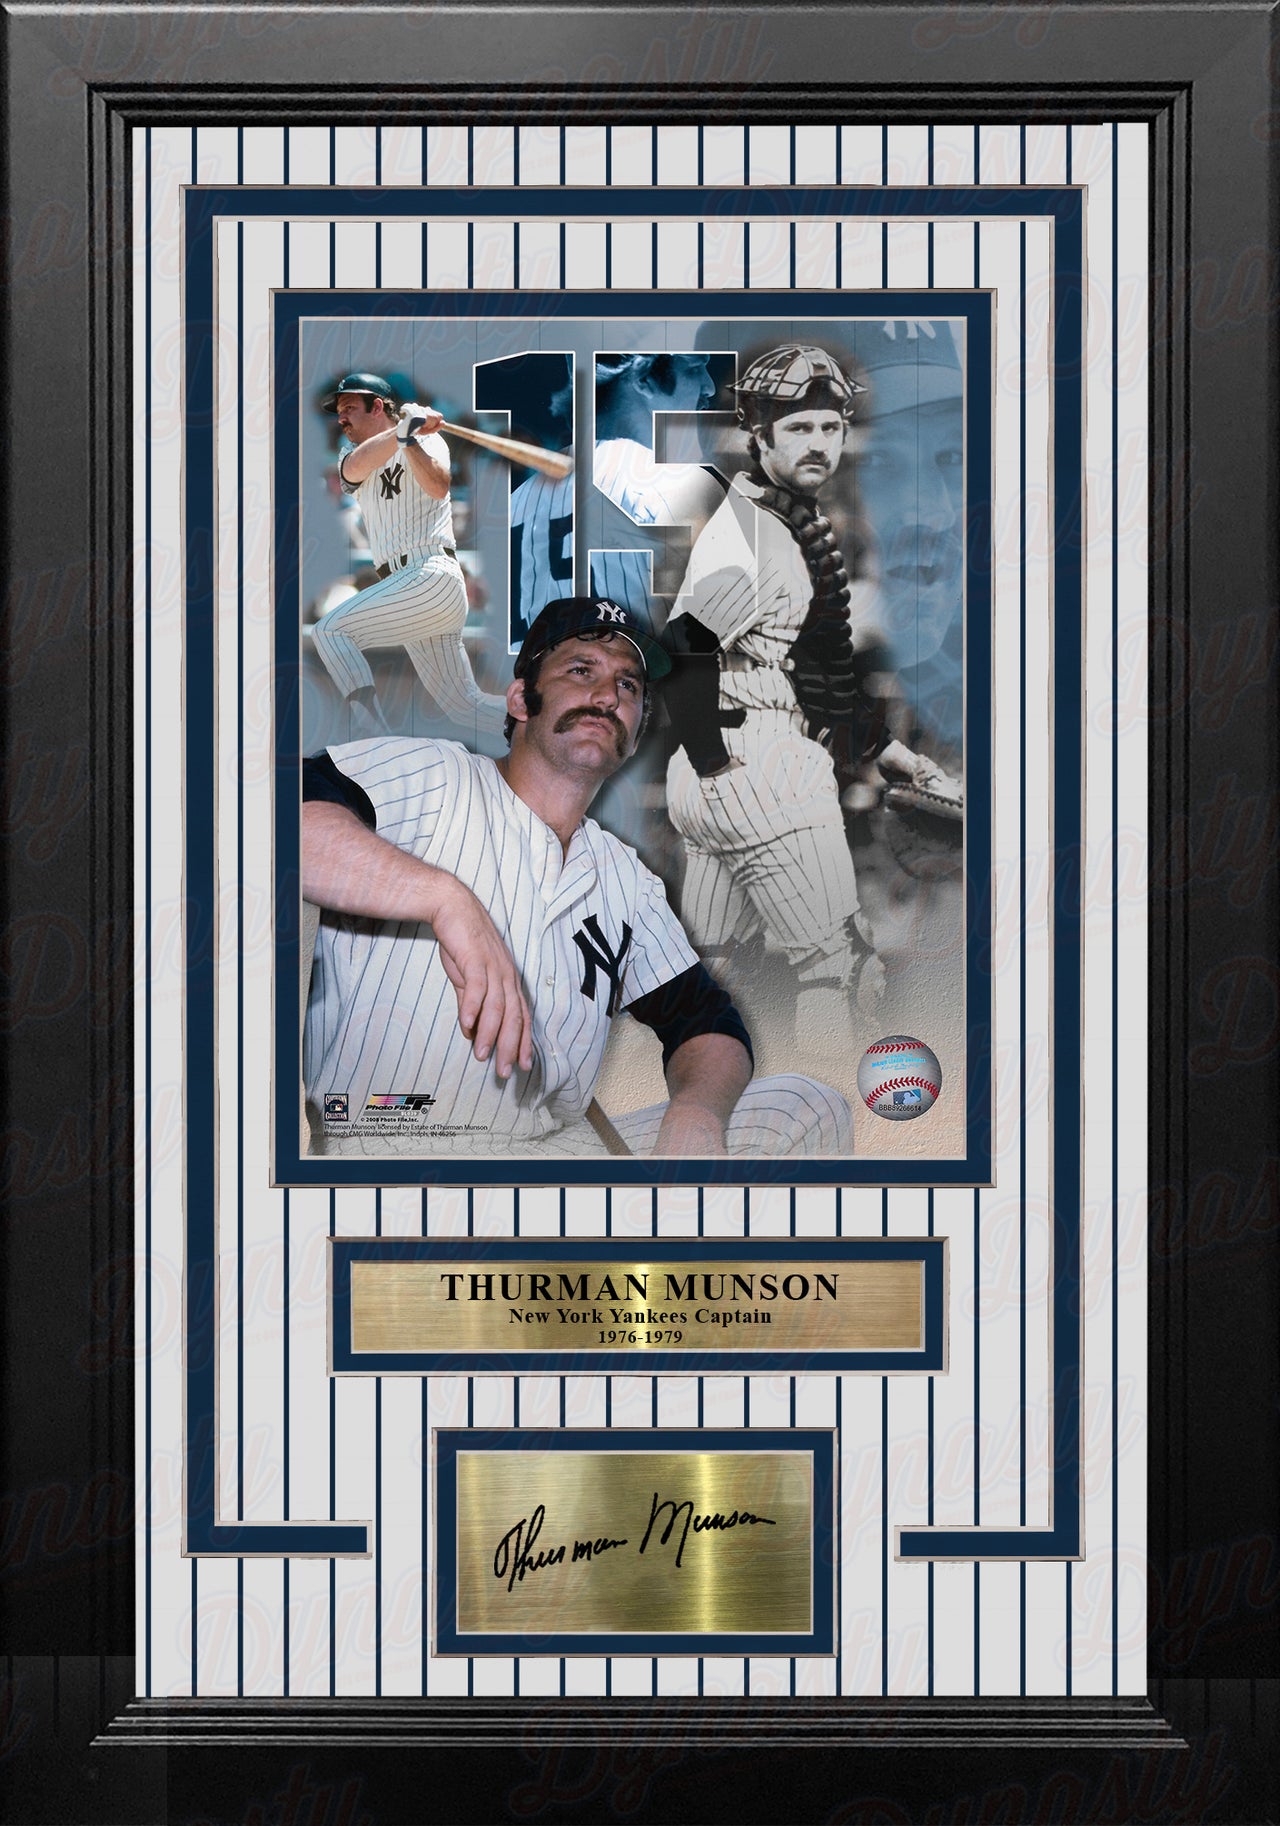 1927 NY Yankees COLORIZED Panoramic Team Print-Framed & Matted